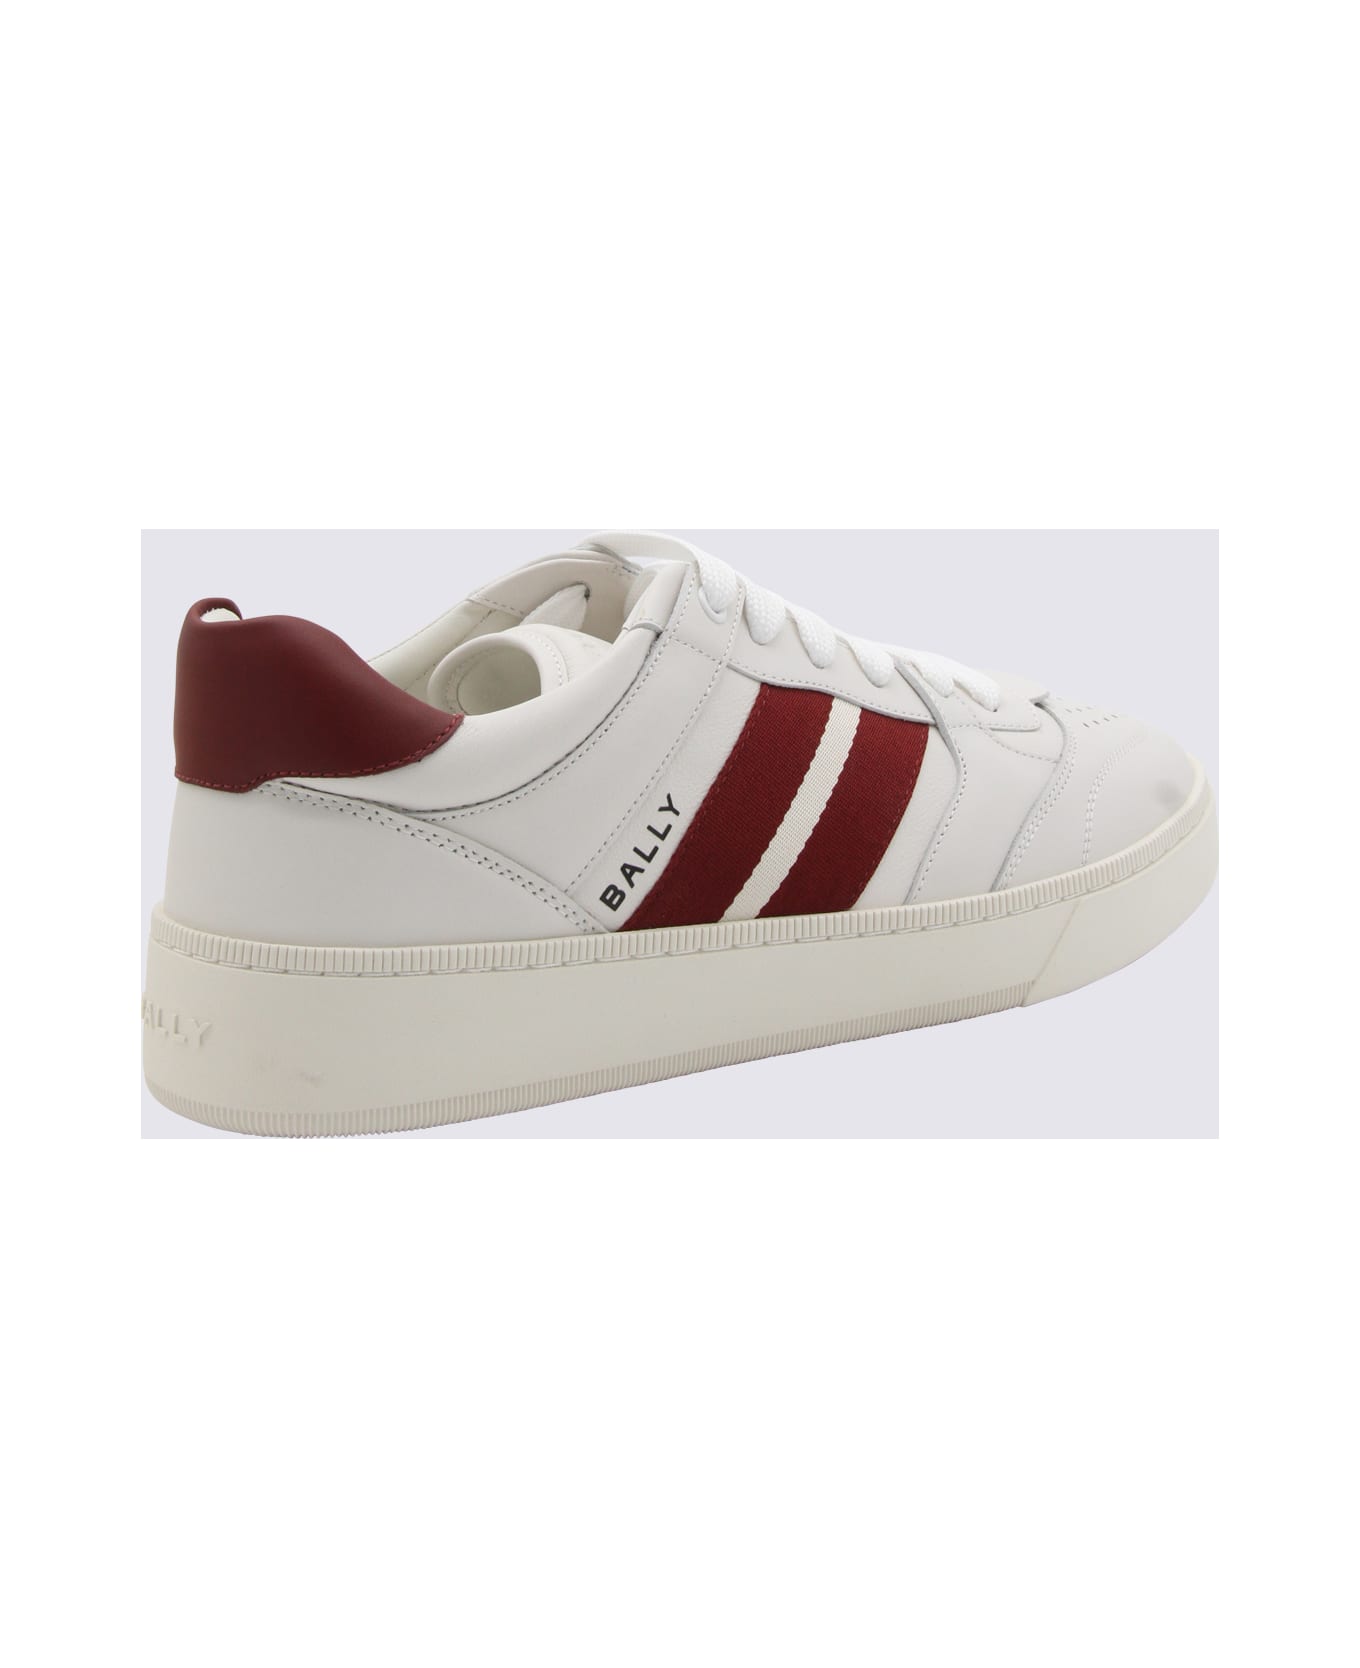 Bally White And Red Leather Sneakers - WHITE/BALLYRED